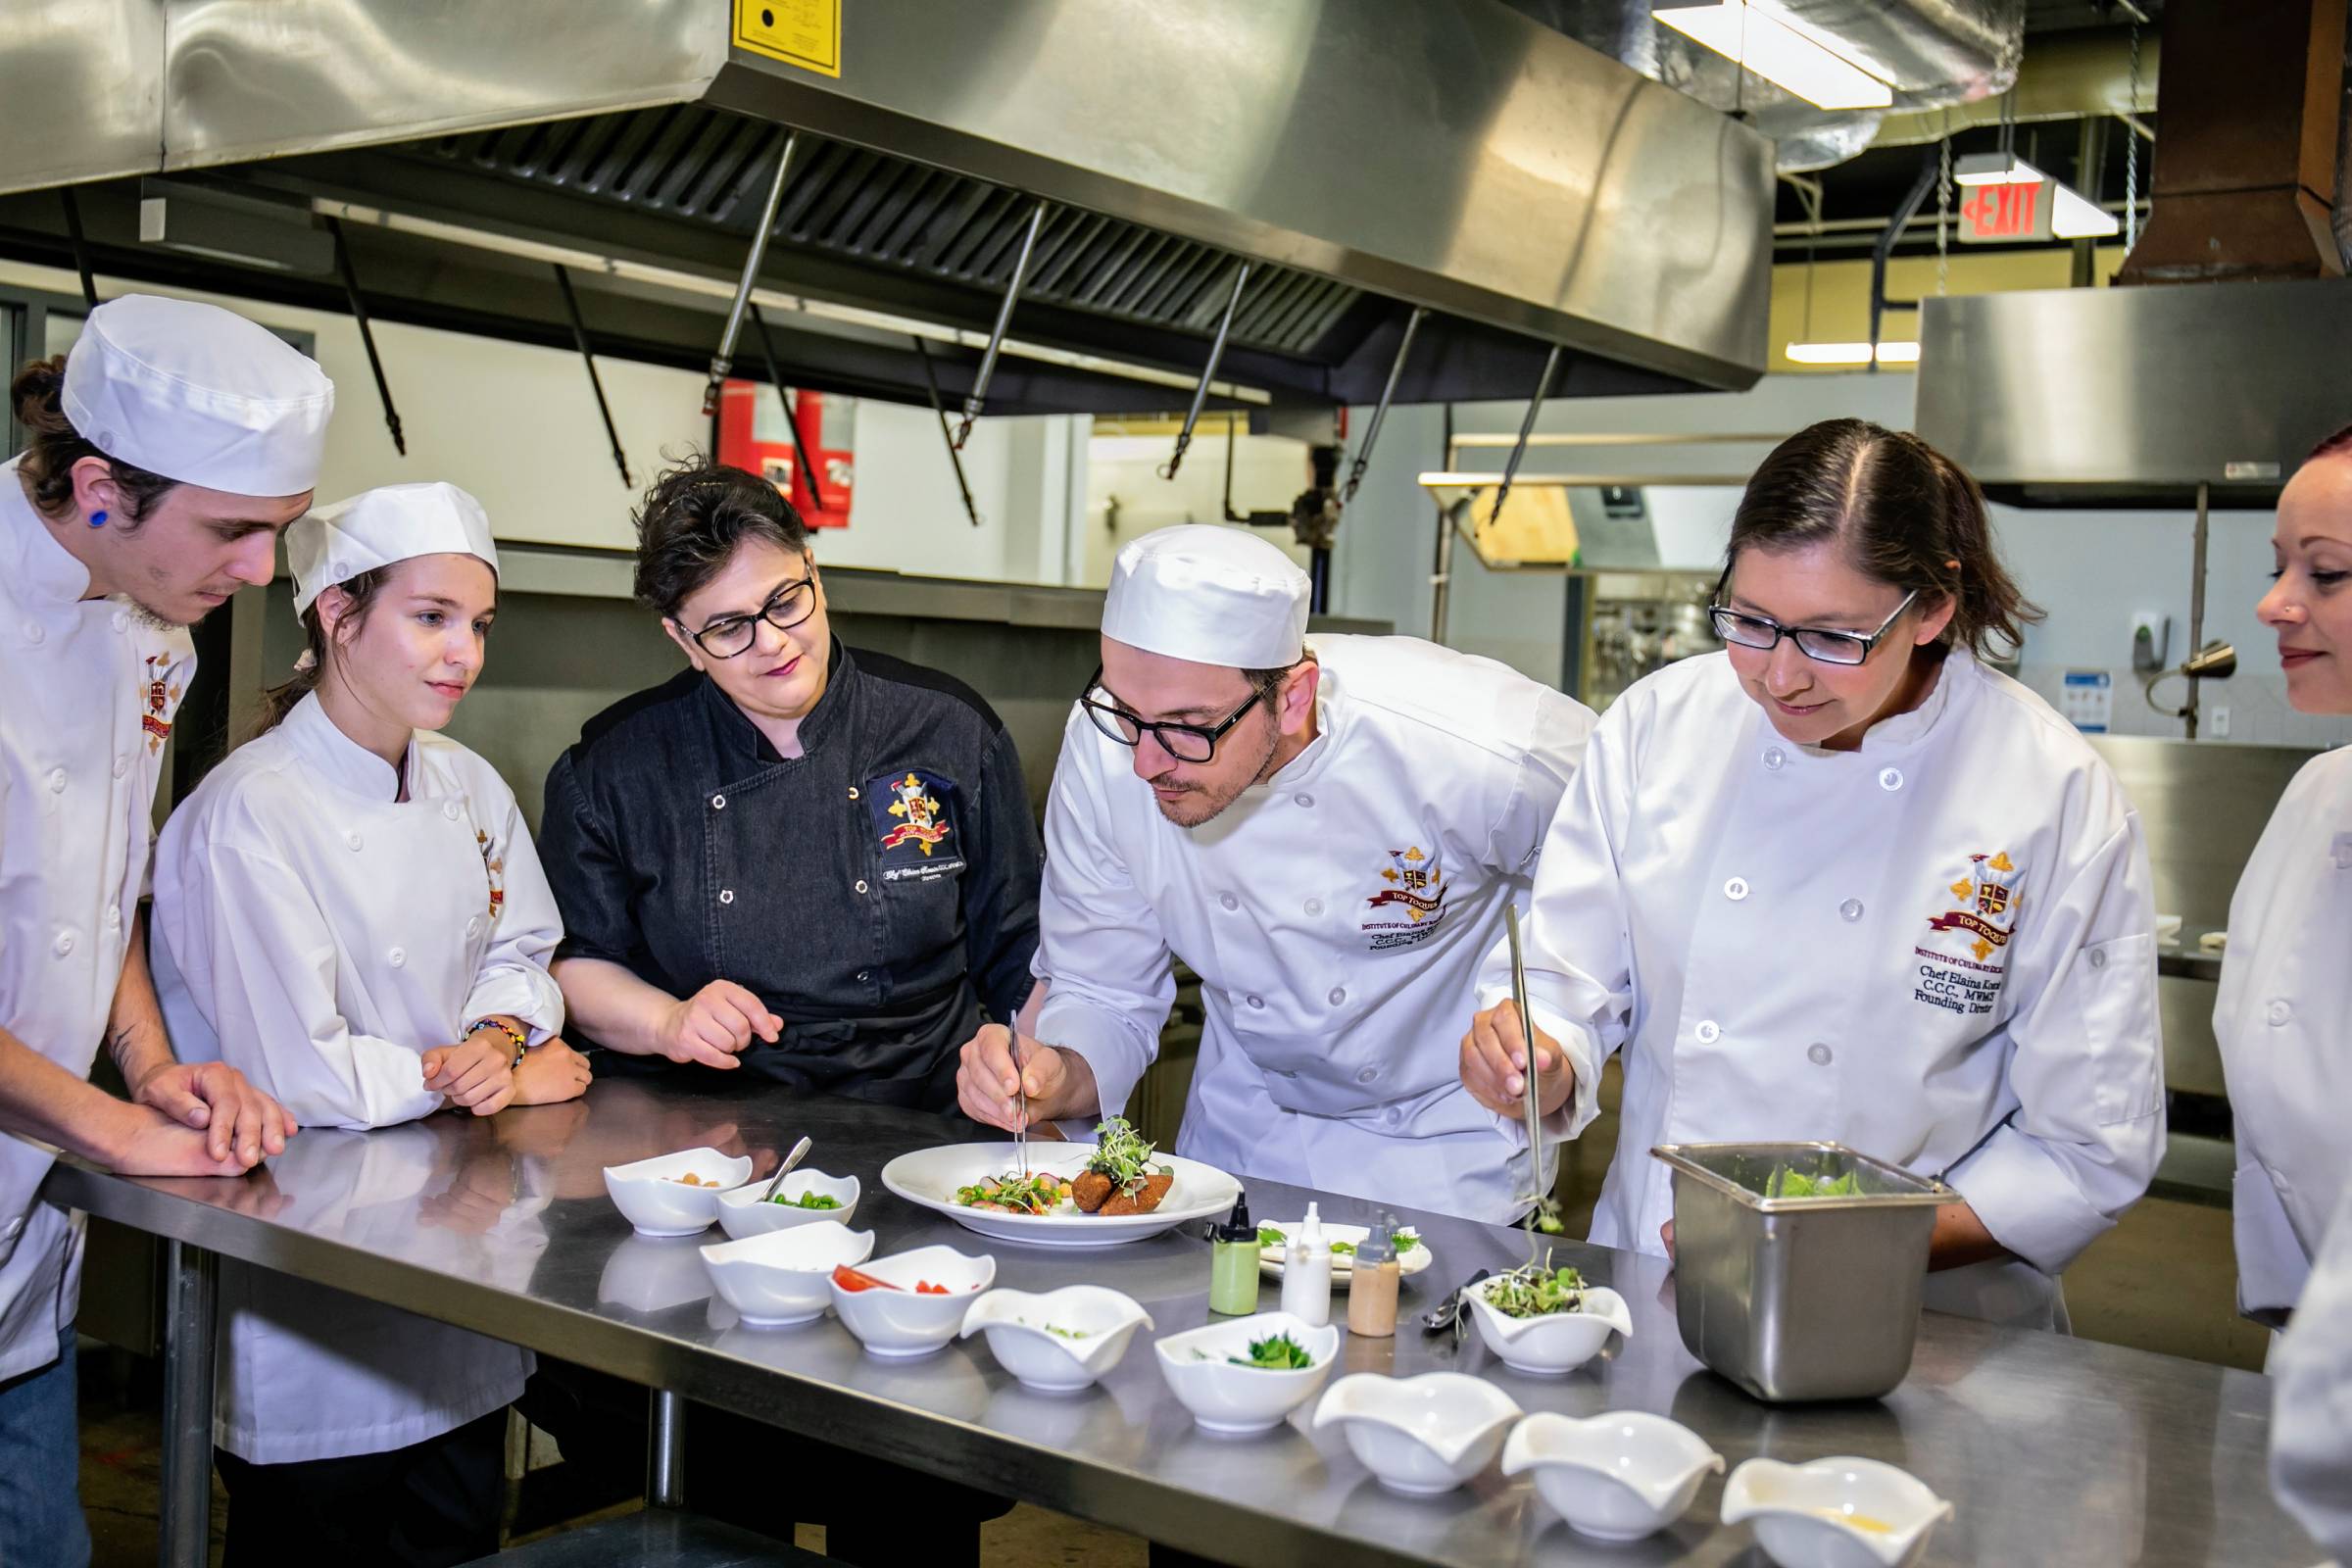 Comparing Culinary Colleges - Image 13 - Top Toques Institute of Culinary Excellence